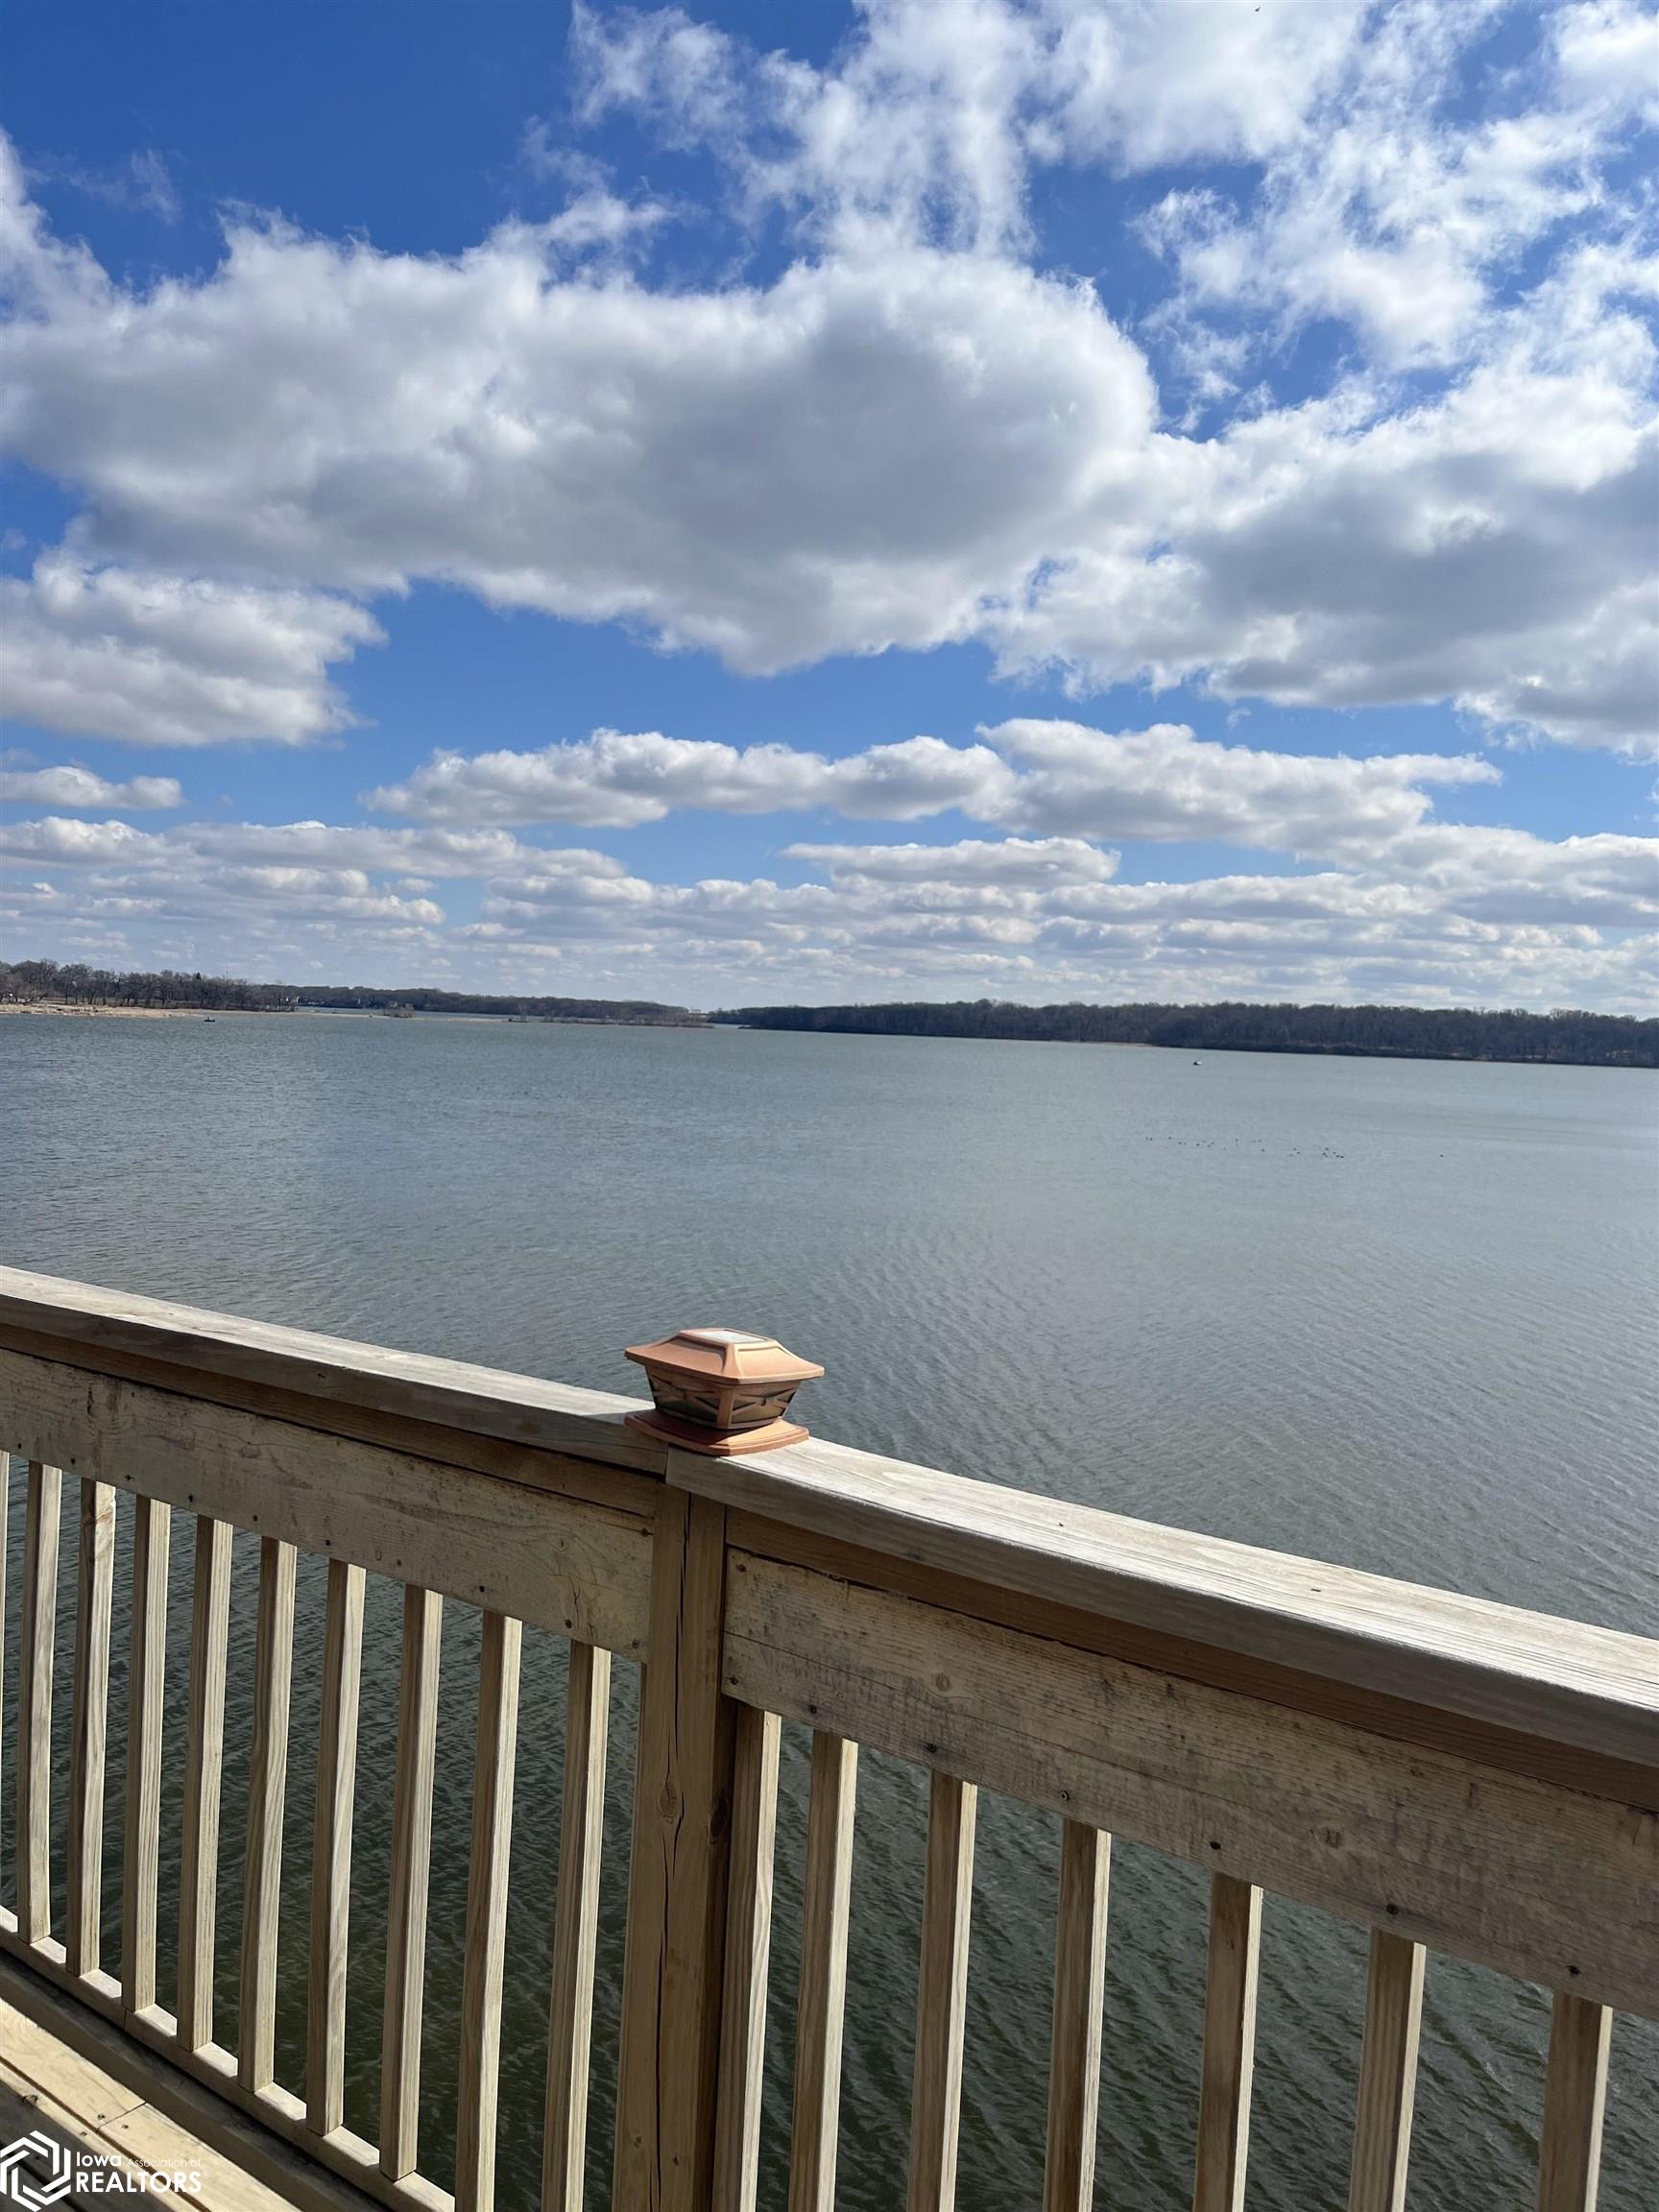 Breath taking view from this penthouse condo. Quiet and peaceful is what you will get.  Watch the boats and birds while having your coffee. This unit comes with the option to enjoy 2 boat slips and lake life.  All kitchen appliances and washer/dryer stay.  Some personal items are included also.